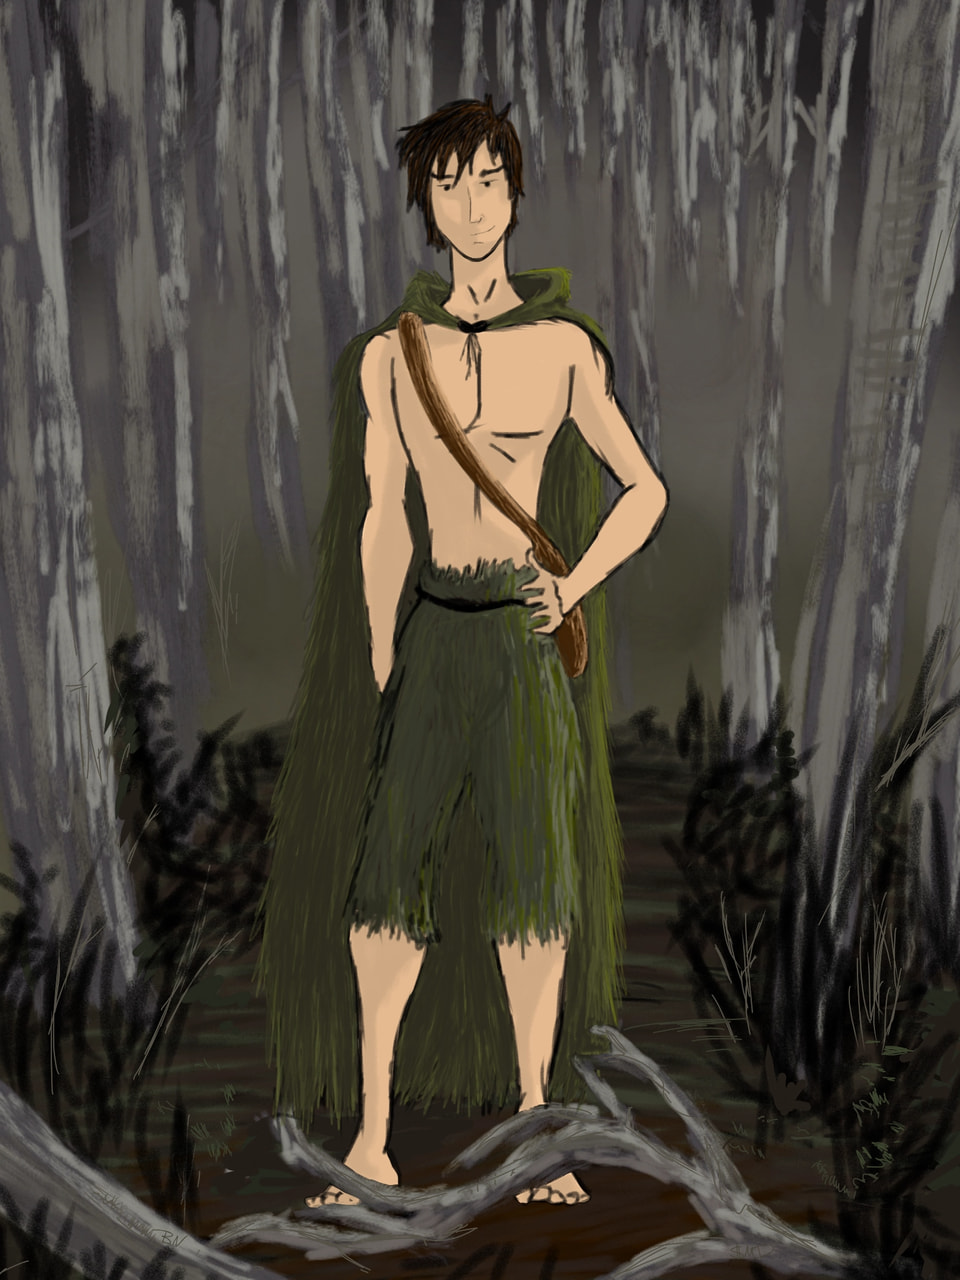 #fridayswithsketch #mymythology Ghillie Dhu, from the Scottish mythology. He is a boy who is the protector of birch wood trees. Often a forest. He plays pranks on people who pass by his territory. Thought I would give it a go.